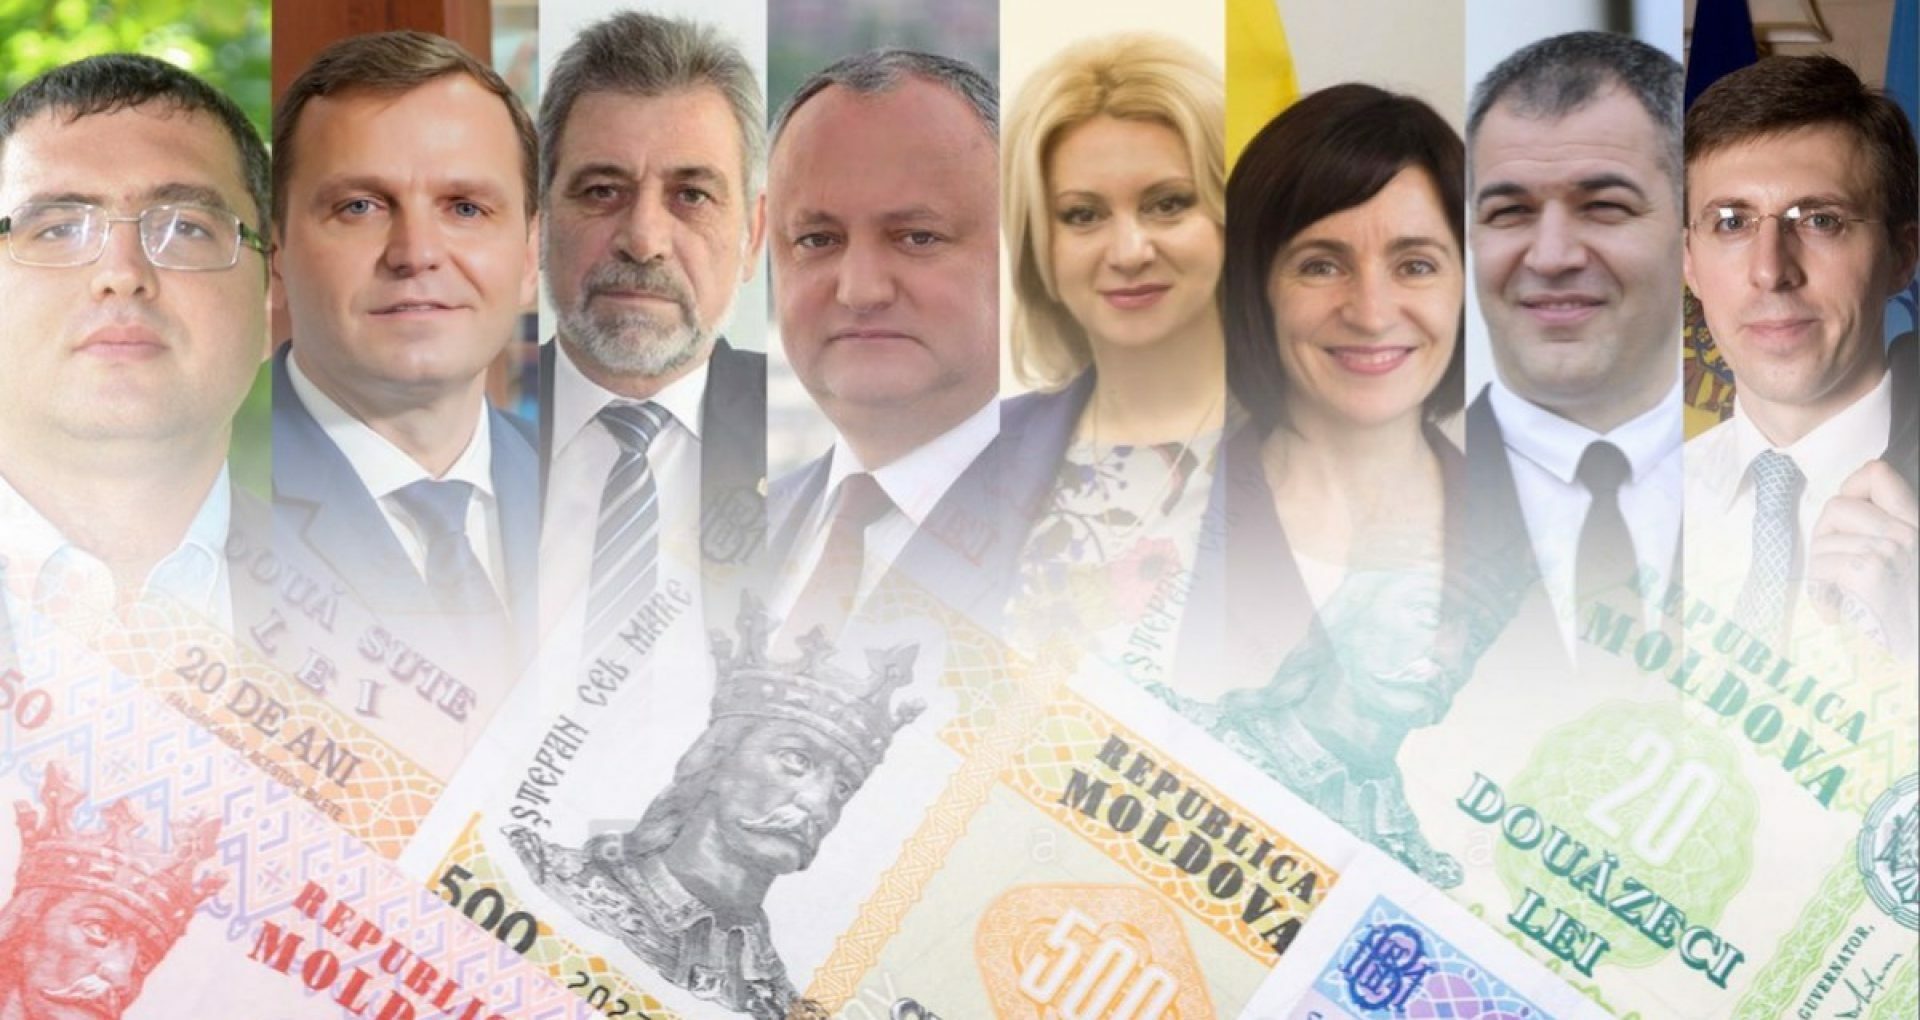 How Much Did the Candidates for Moldova’s Presidential Elections Pay For a Vote?